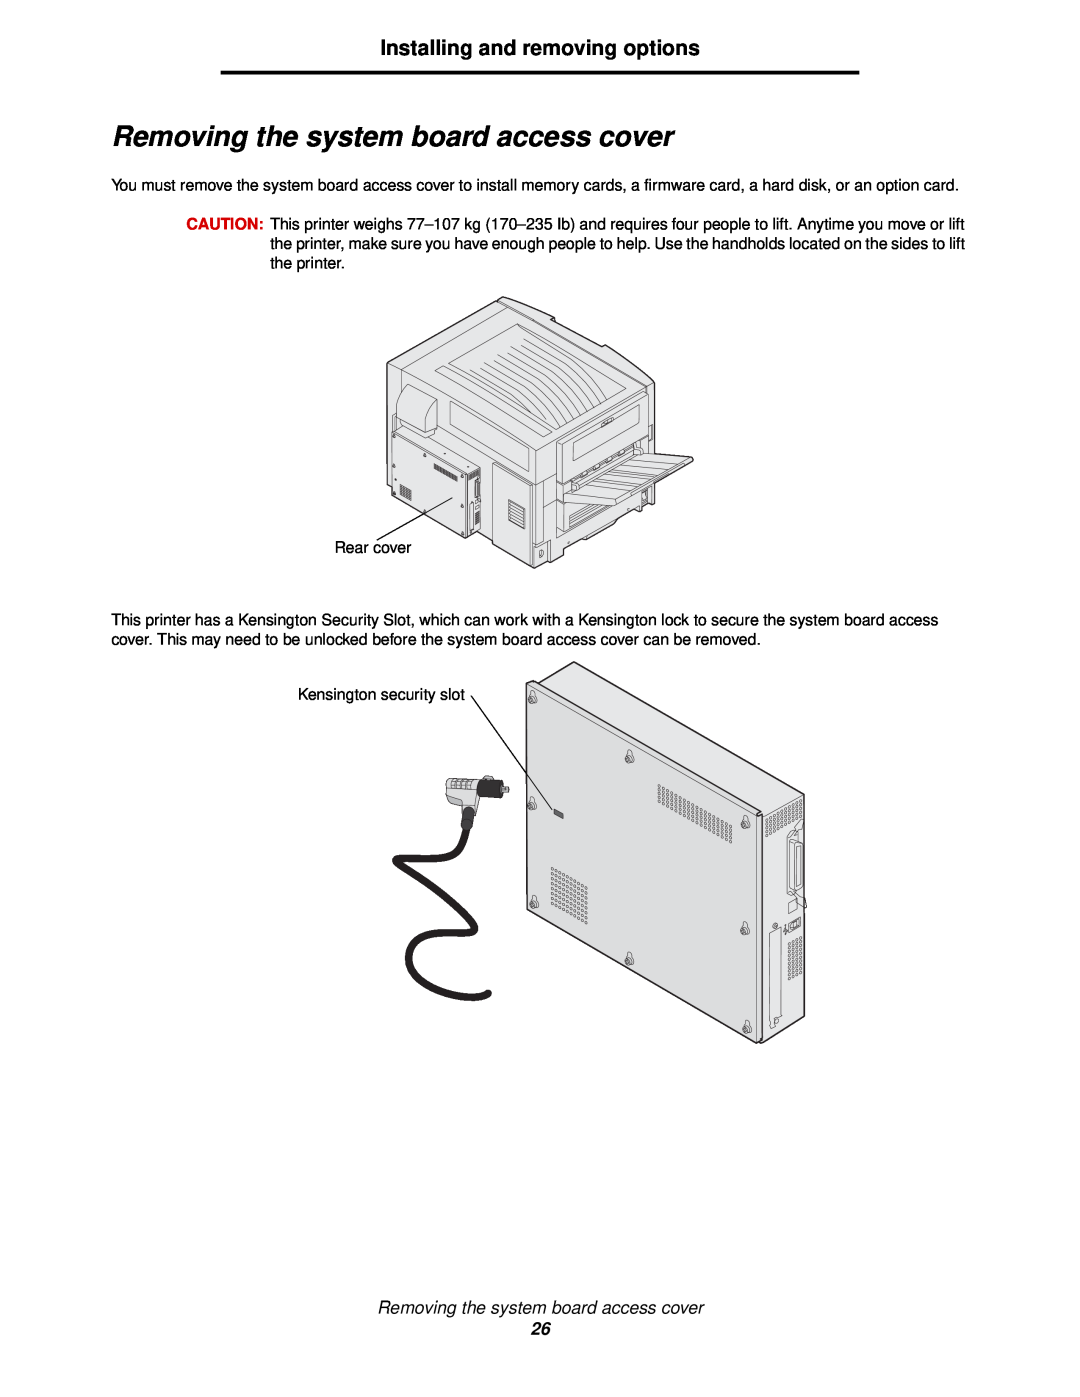 Lexmark 920 manual Removing the system board access cover, Installing and removing options 